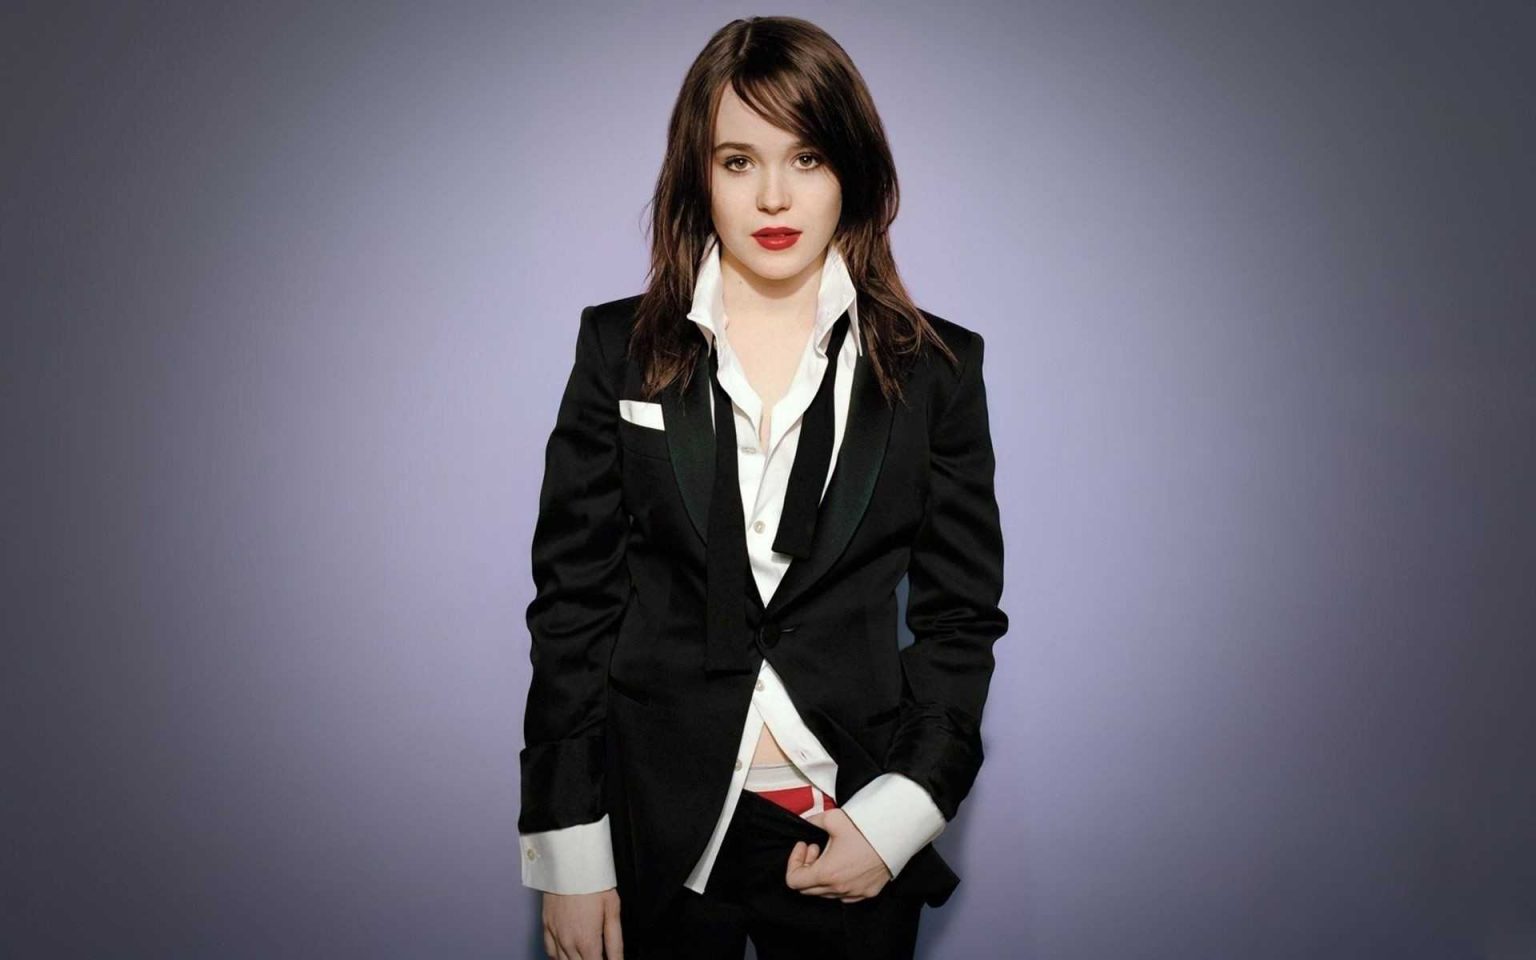 41 Ellen Page Nude Pictures Which Are Impressively Intriguing 22